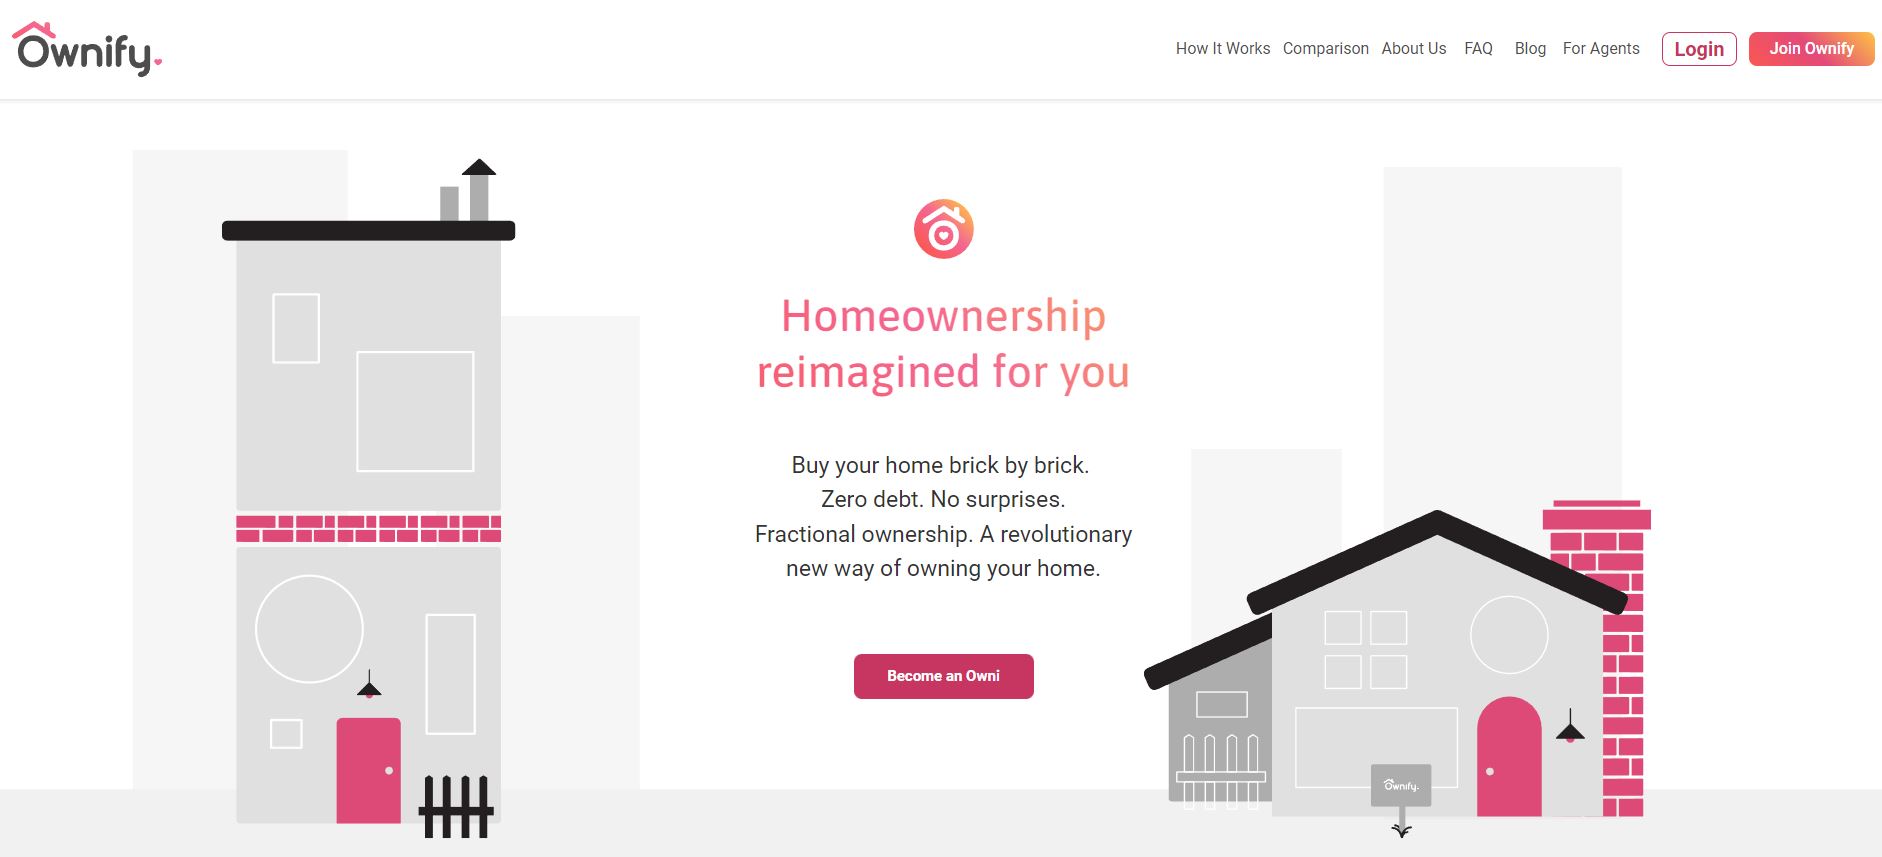 With an impressive $7M in seed funding, Ownify is reimagining homeownership to make it accessible